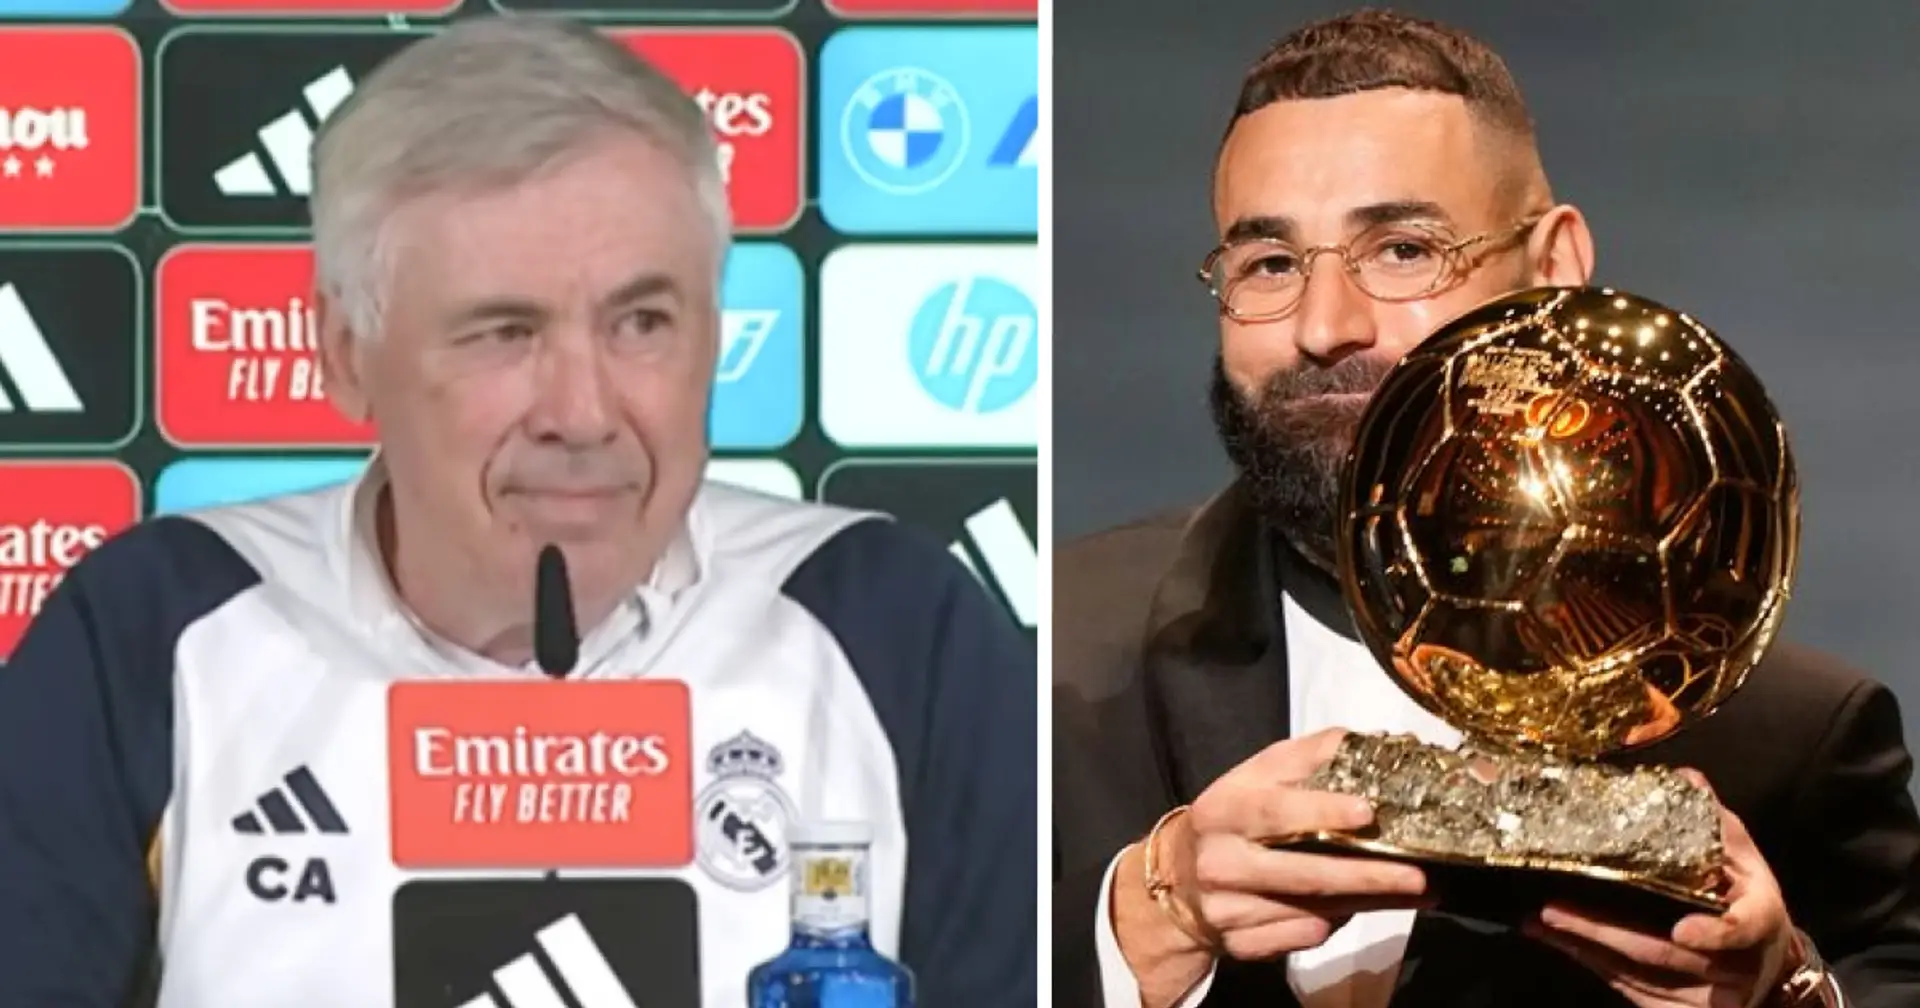 Ancelotti names TWO Real Madrid players who should be joint Ballon d'Or winners this year